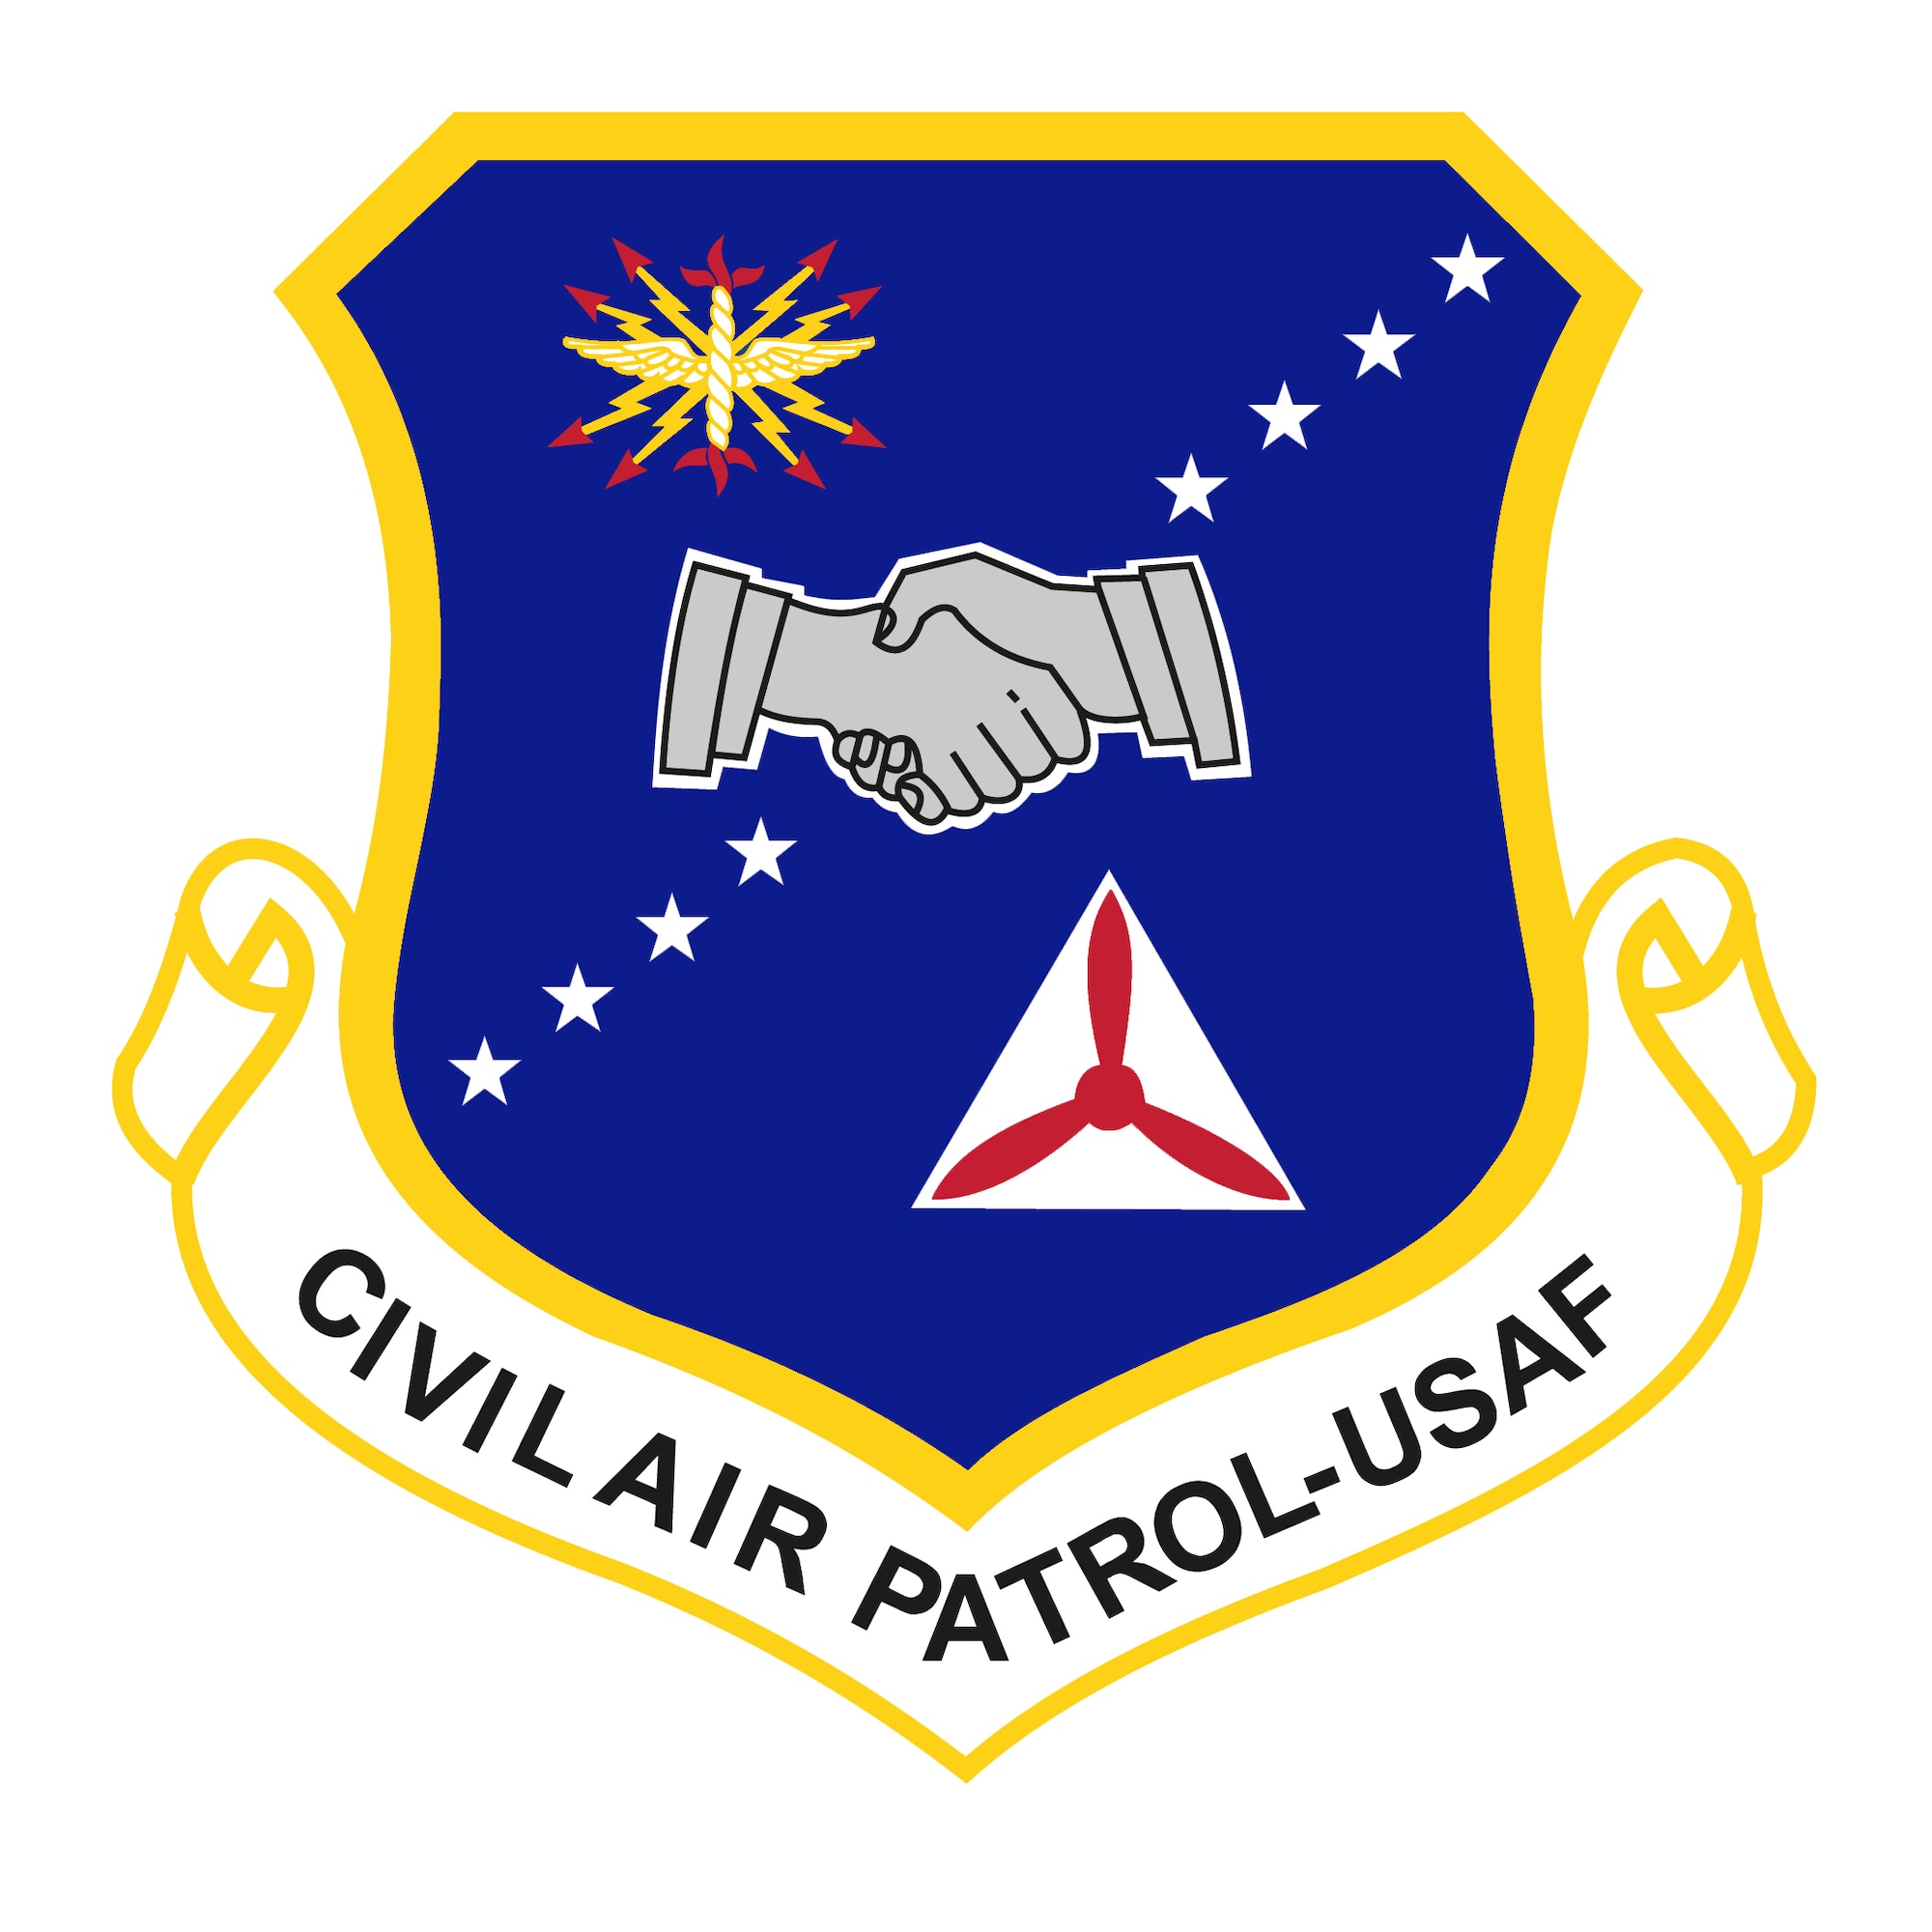 Civil Air Patrol Shield v2 (Color), Graphic courtesy of Civil Air Patrol National Headquarters. Commercial reproduction of this emblem is NOT permitted without the permission of the proponent organizational/unit commander. Image is 7x7 inches @ 300 ppi.